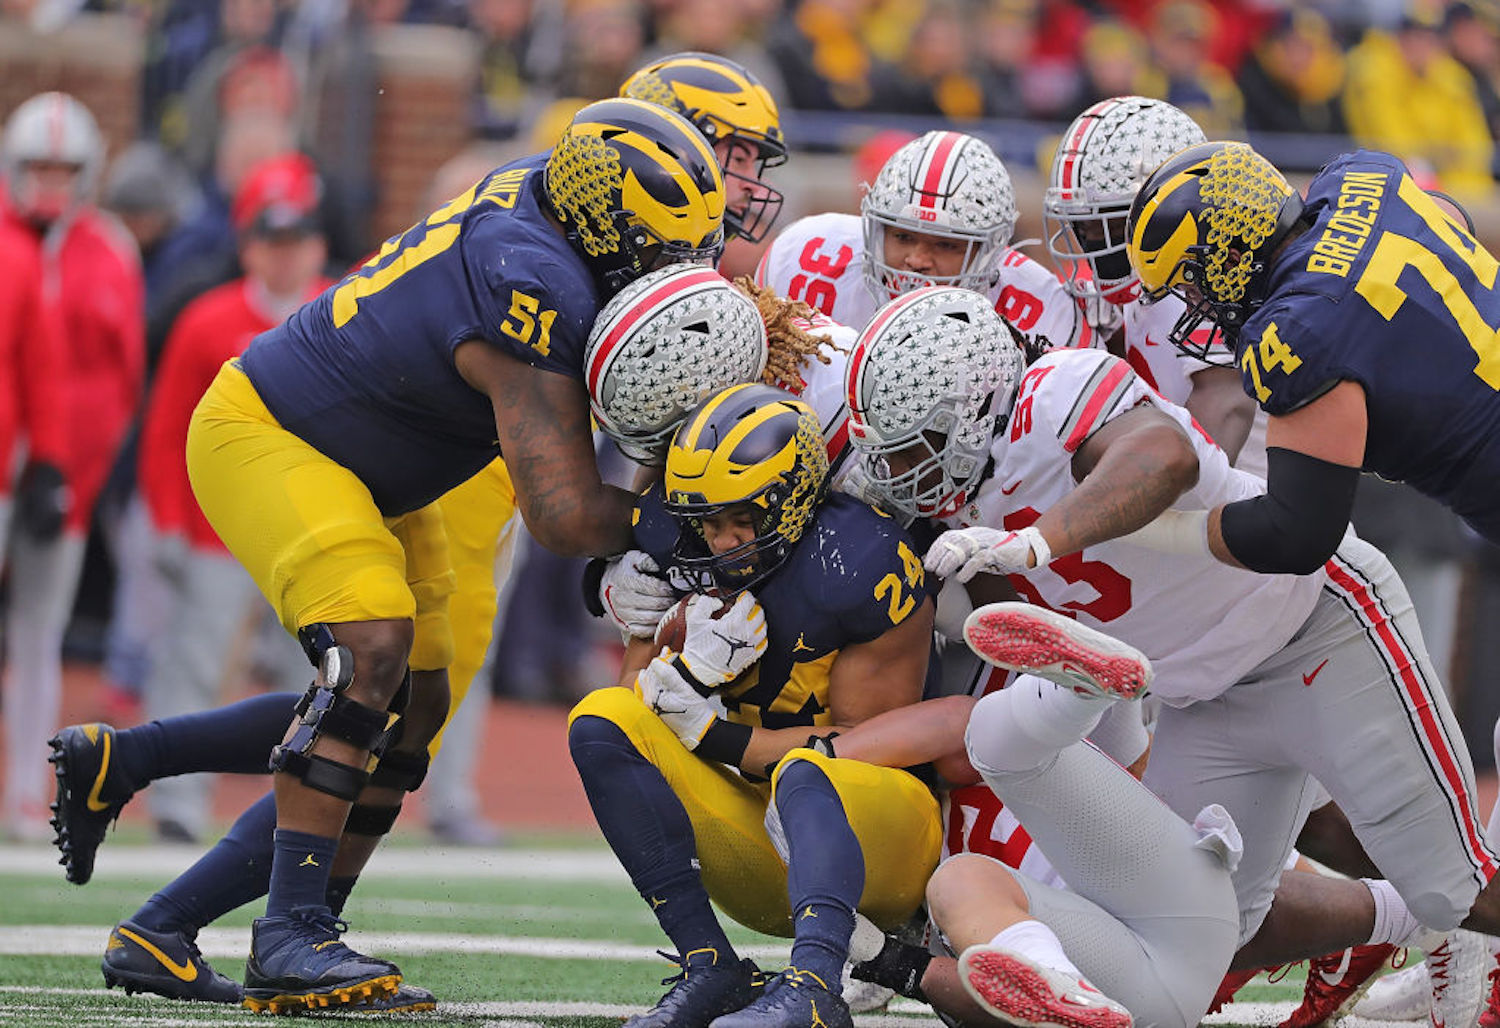 Ohio State and Michigan won't play this season for the first time in decades. When did the rivalry start and when was the last time The Game wasn't played?